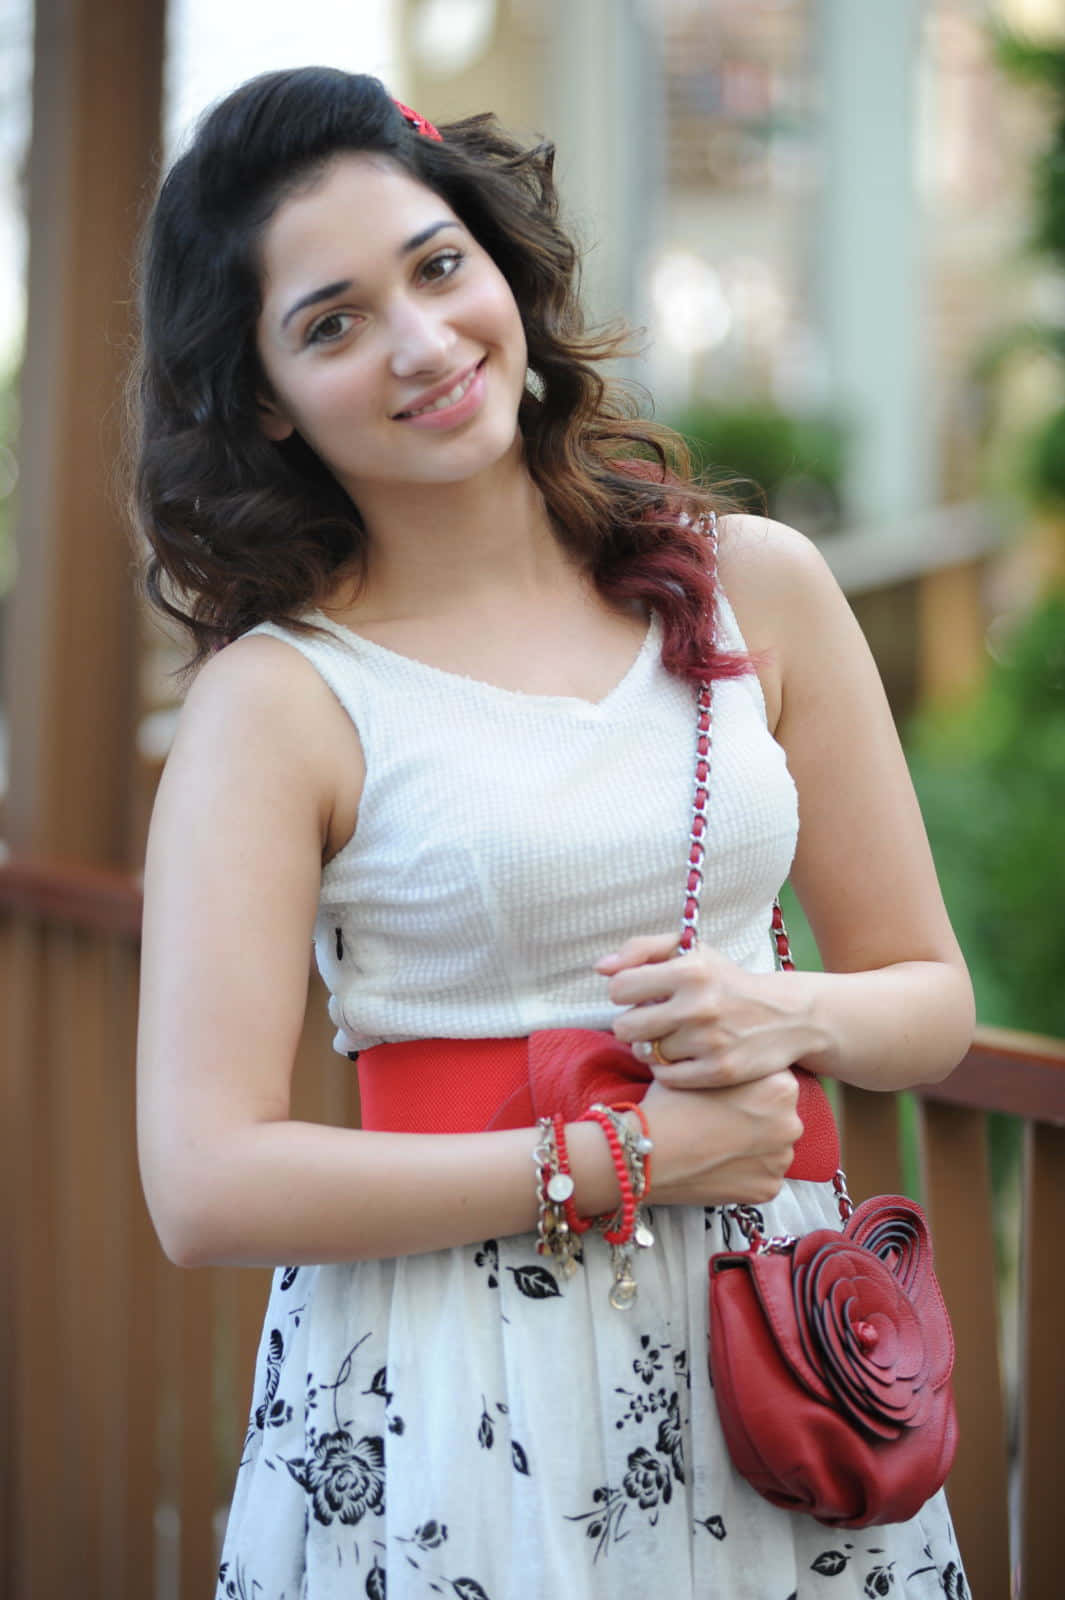 Vitindisk Flicka Tamannaah (as A Suggestion For A Computer Or Mobile Wallpaper) Wallpaper